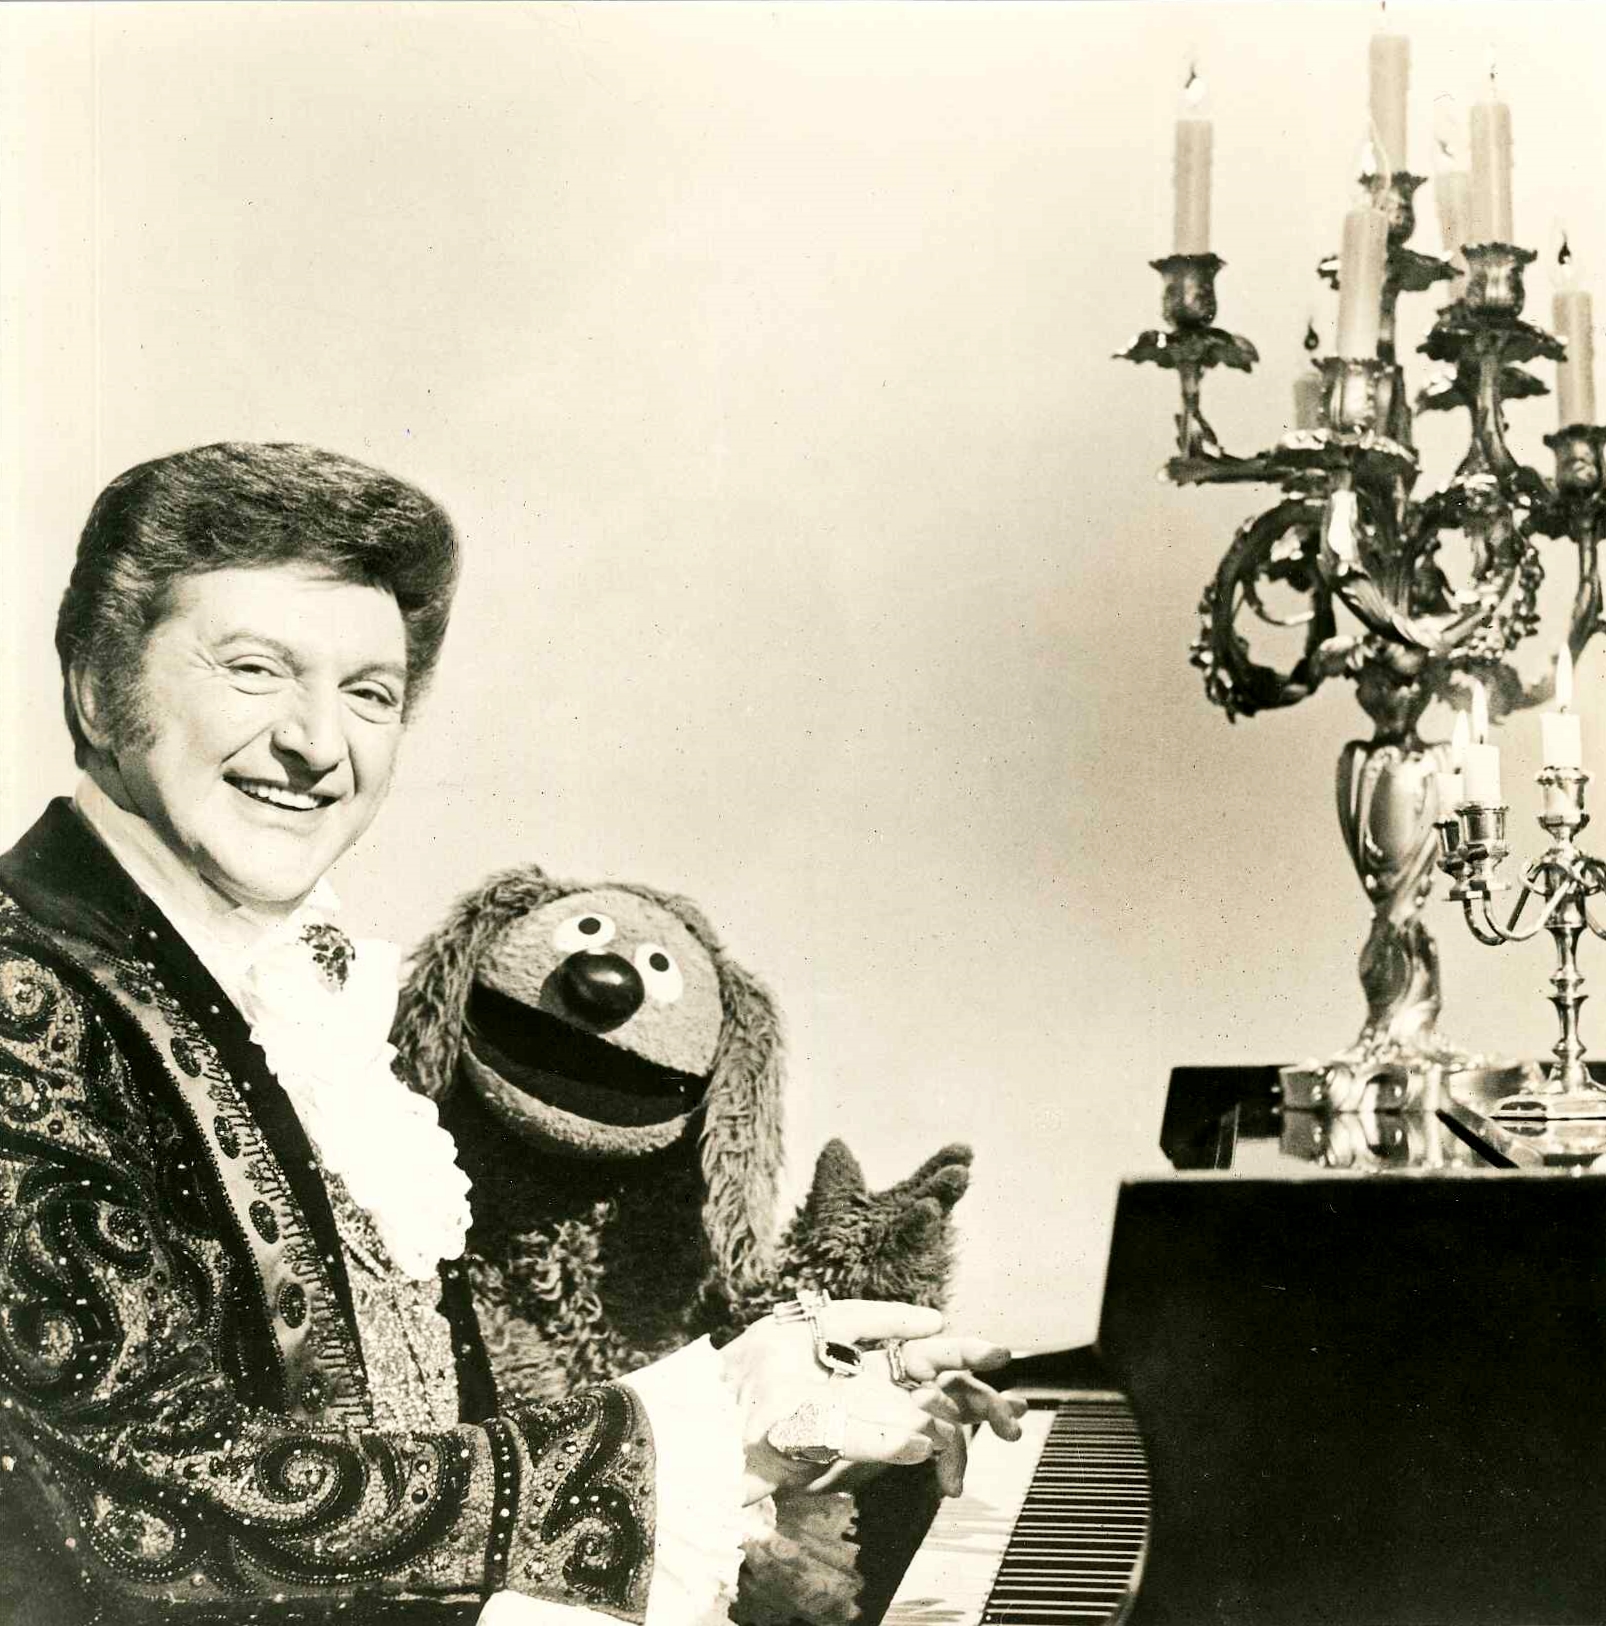 Pictures Of Liberace